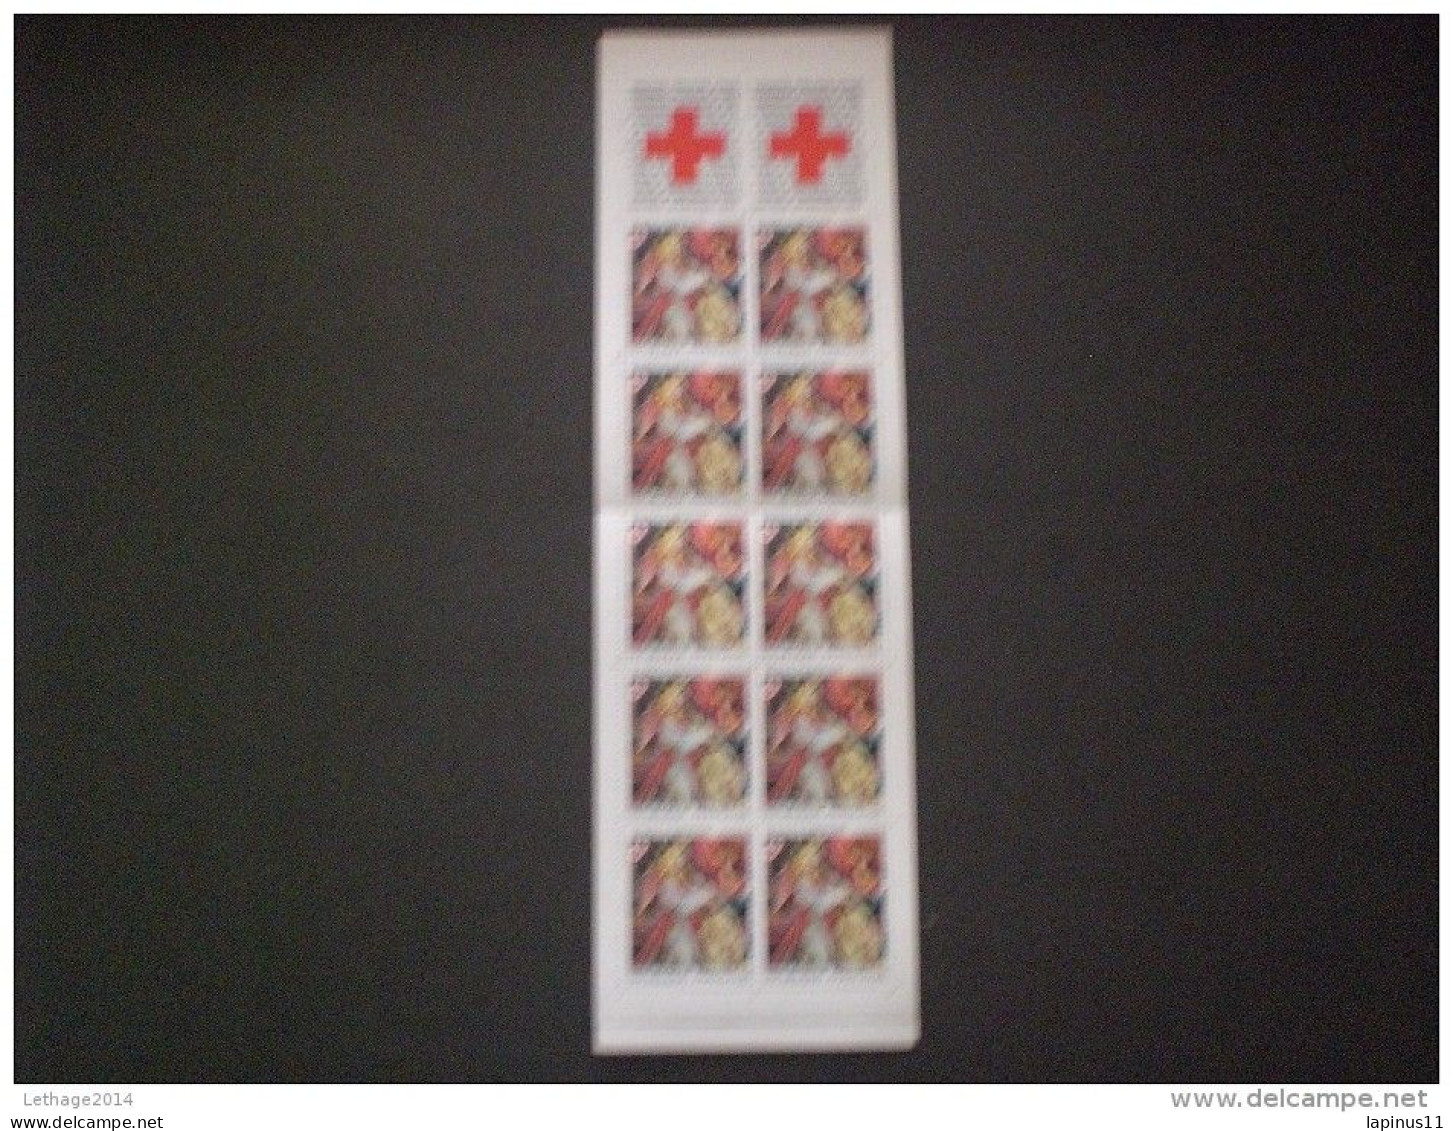 STAMPS FRANCE CARNETS 1985 RED CROSS - Personen